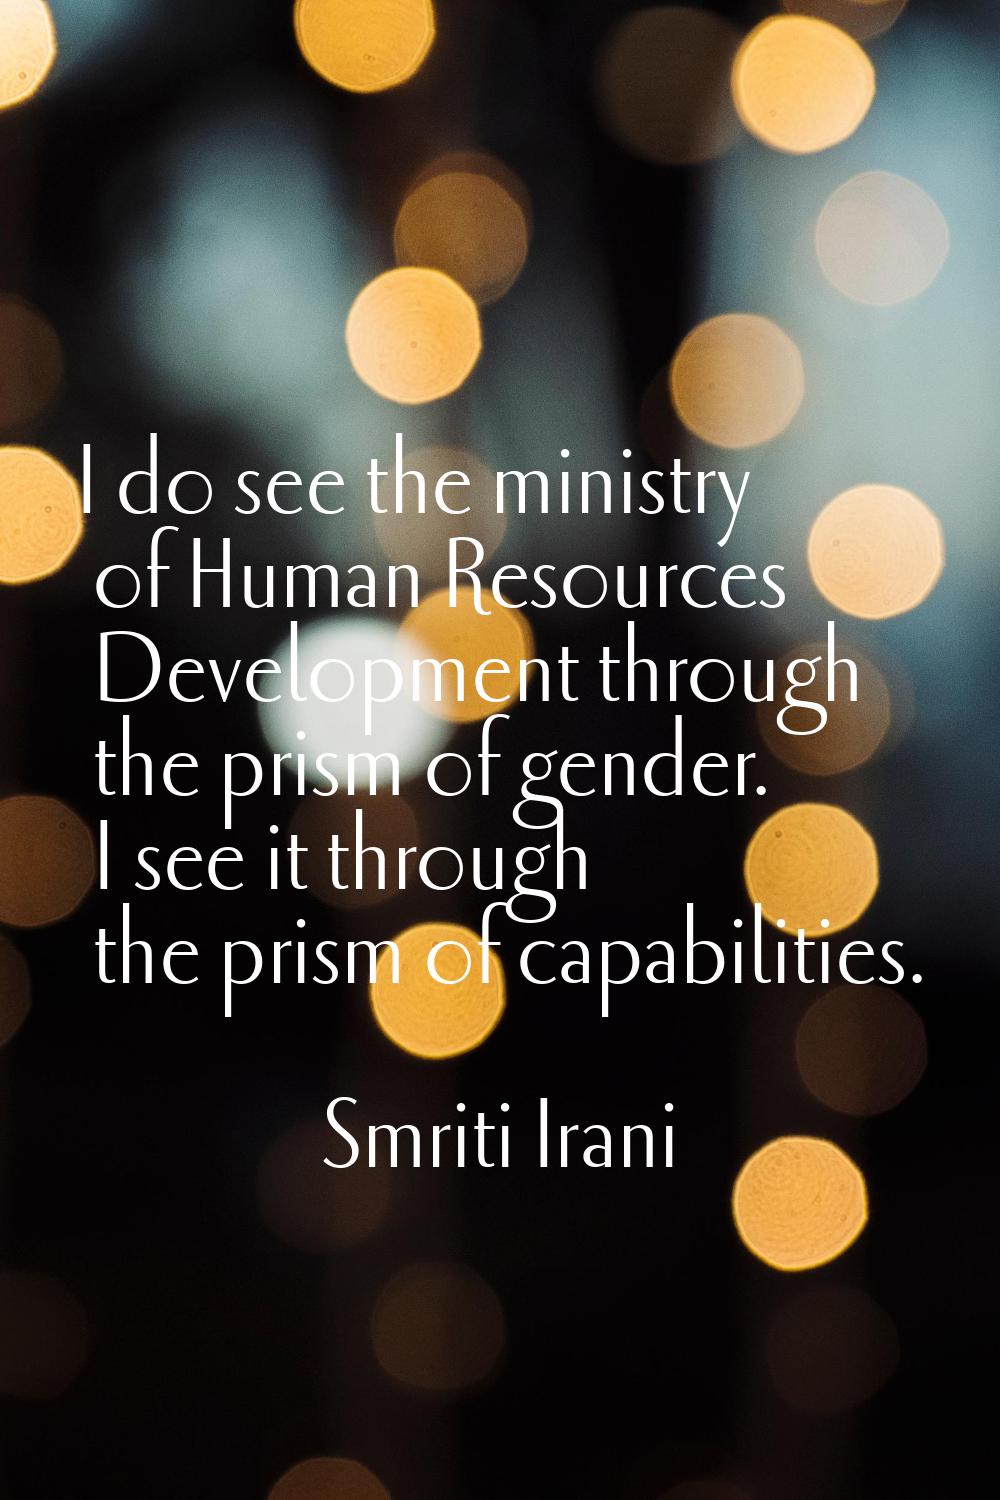 I do see the ministry of Human Resources Development through the prism of gender. I see it through 